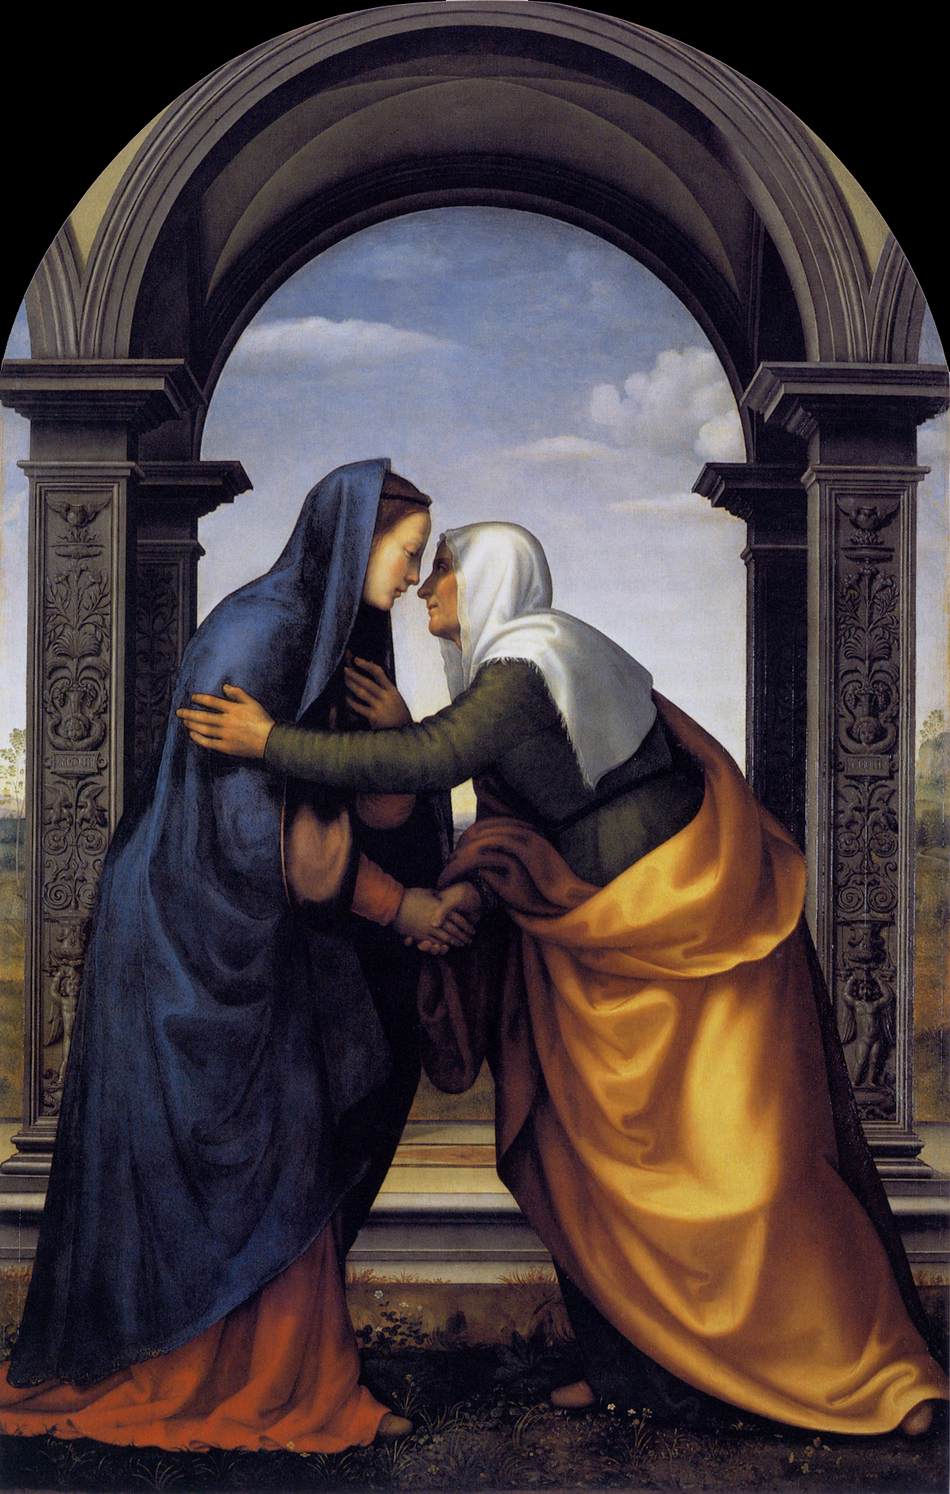 The Visitation of the Blessed Virgin Mary dans immagini sacre Visitation